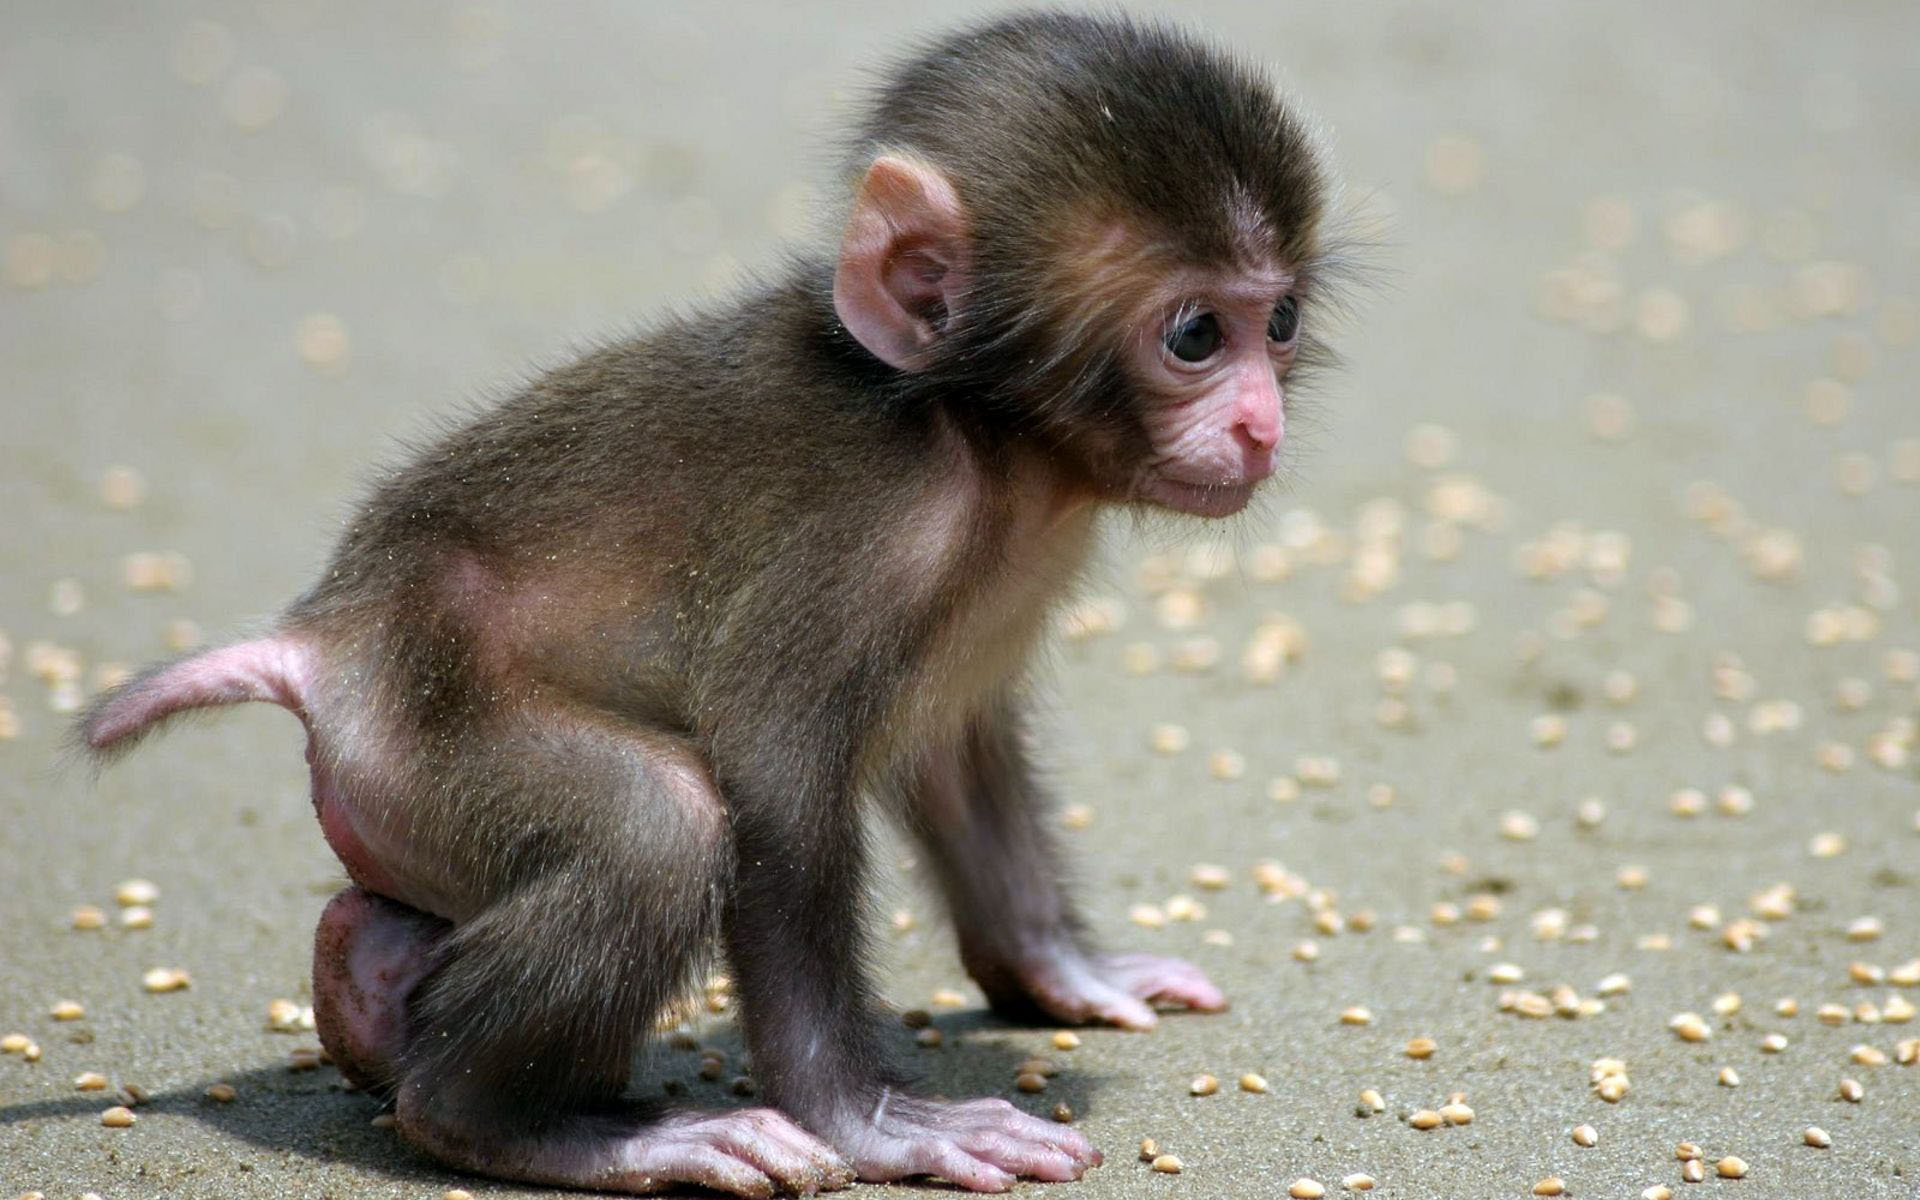 Monkey HD Wallpapers Monkey Pictures Free